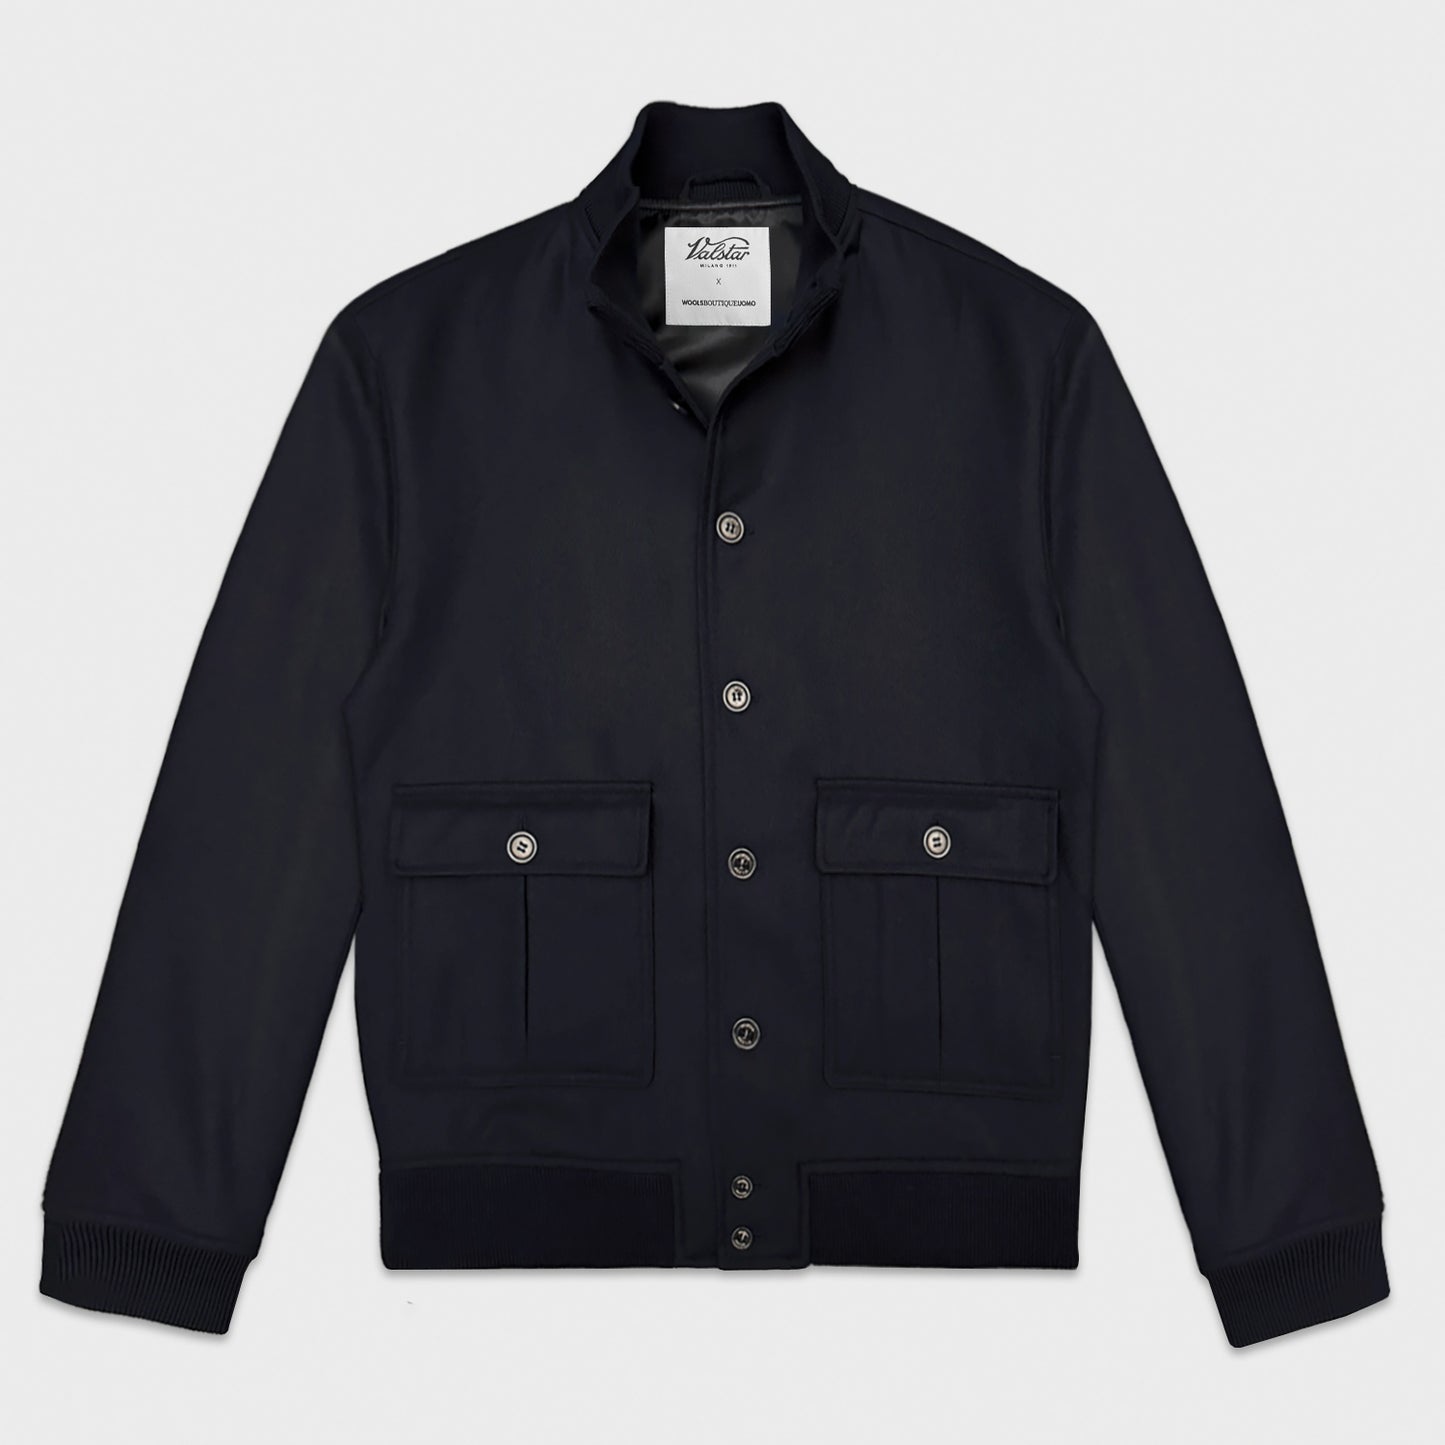 Navy Wool Valstarino Jacket Valstar x Wools Boutique Uomo. Capsule collection of a classic wool bomber jacket with the design of the iconic Valstarino using a refined flannel wool fabric made by Taylor & Lodge UK, lined inside, navy blue color.